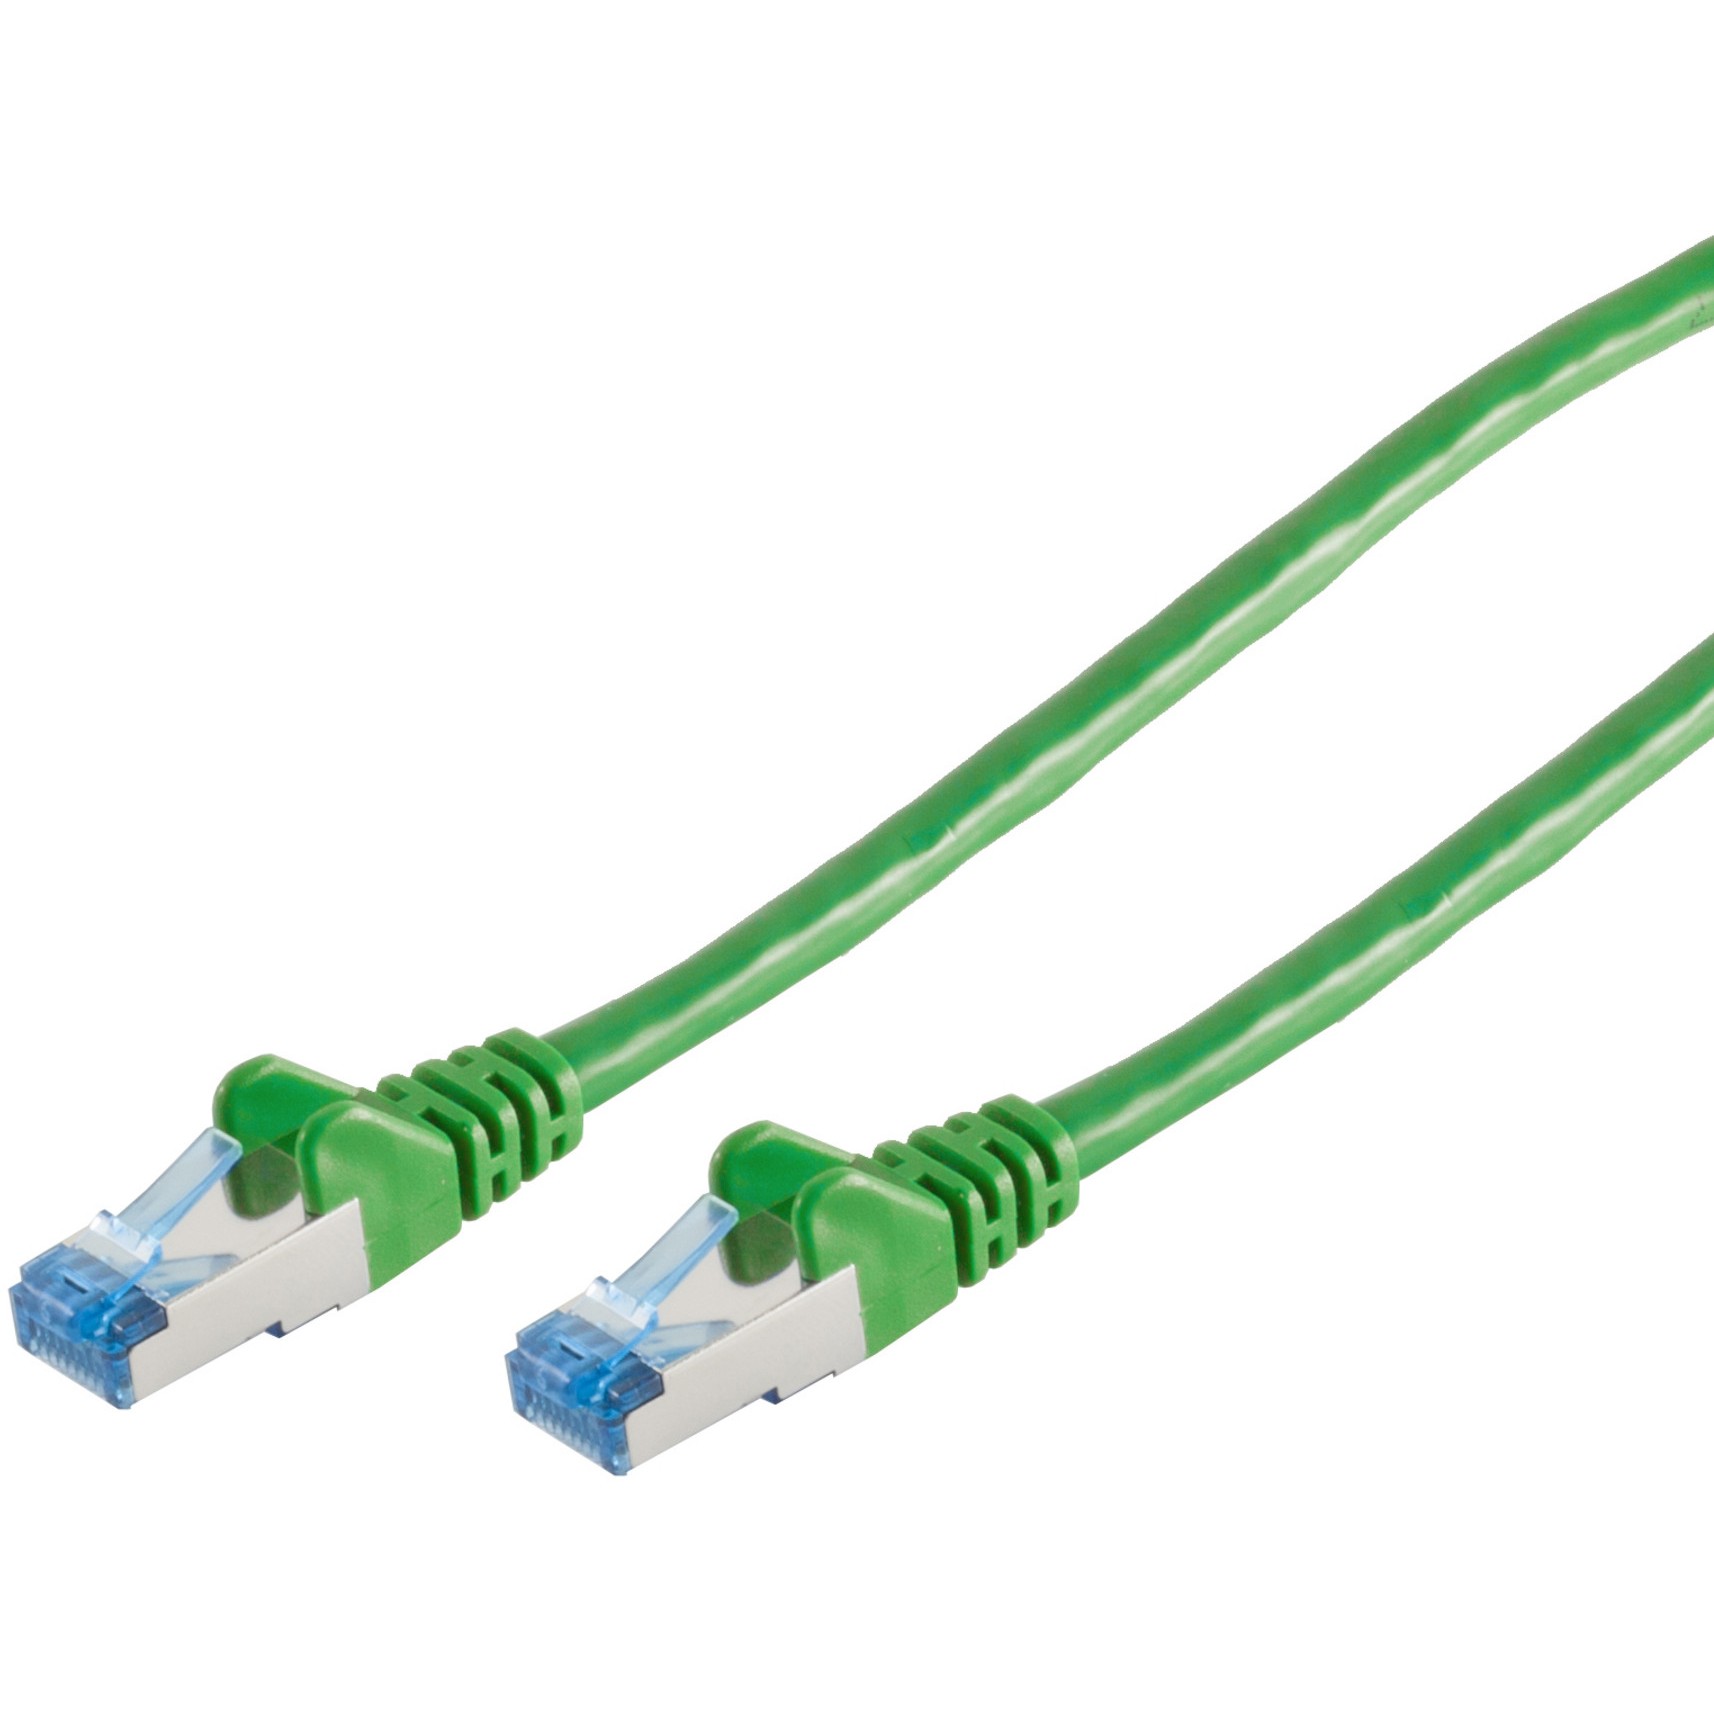 S-Conn 75711-0.25G networking cable - 75711-0.25G